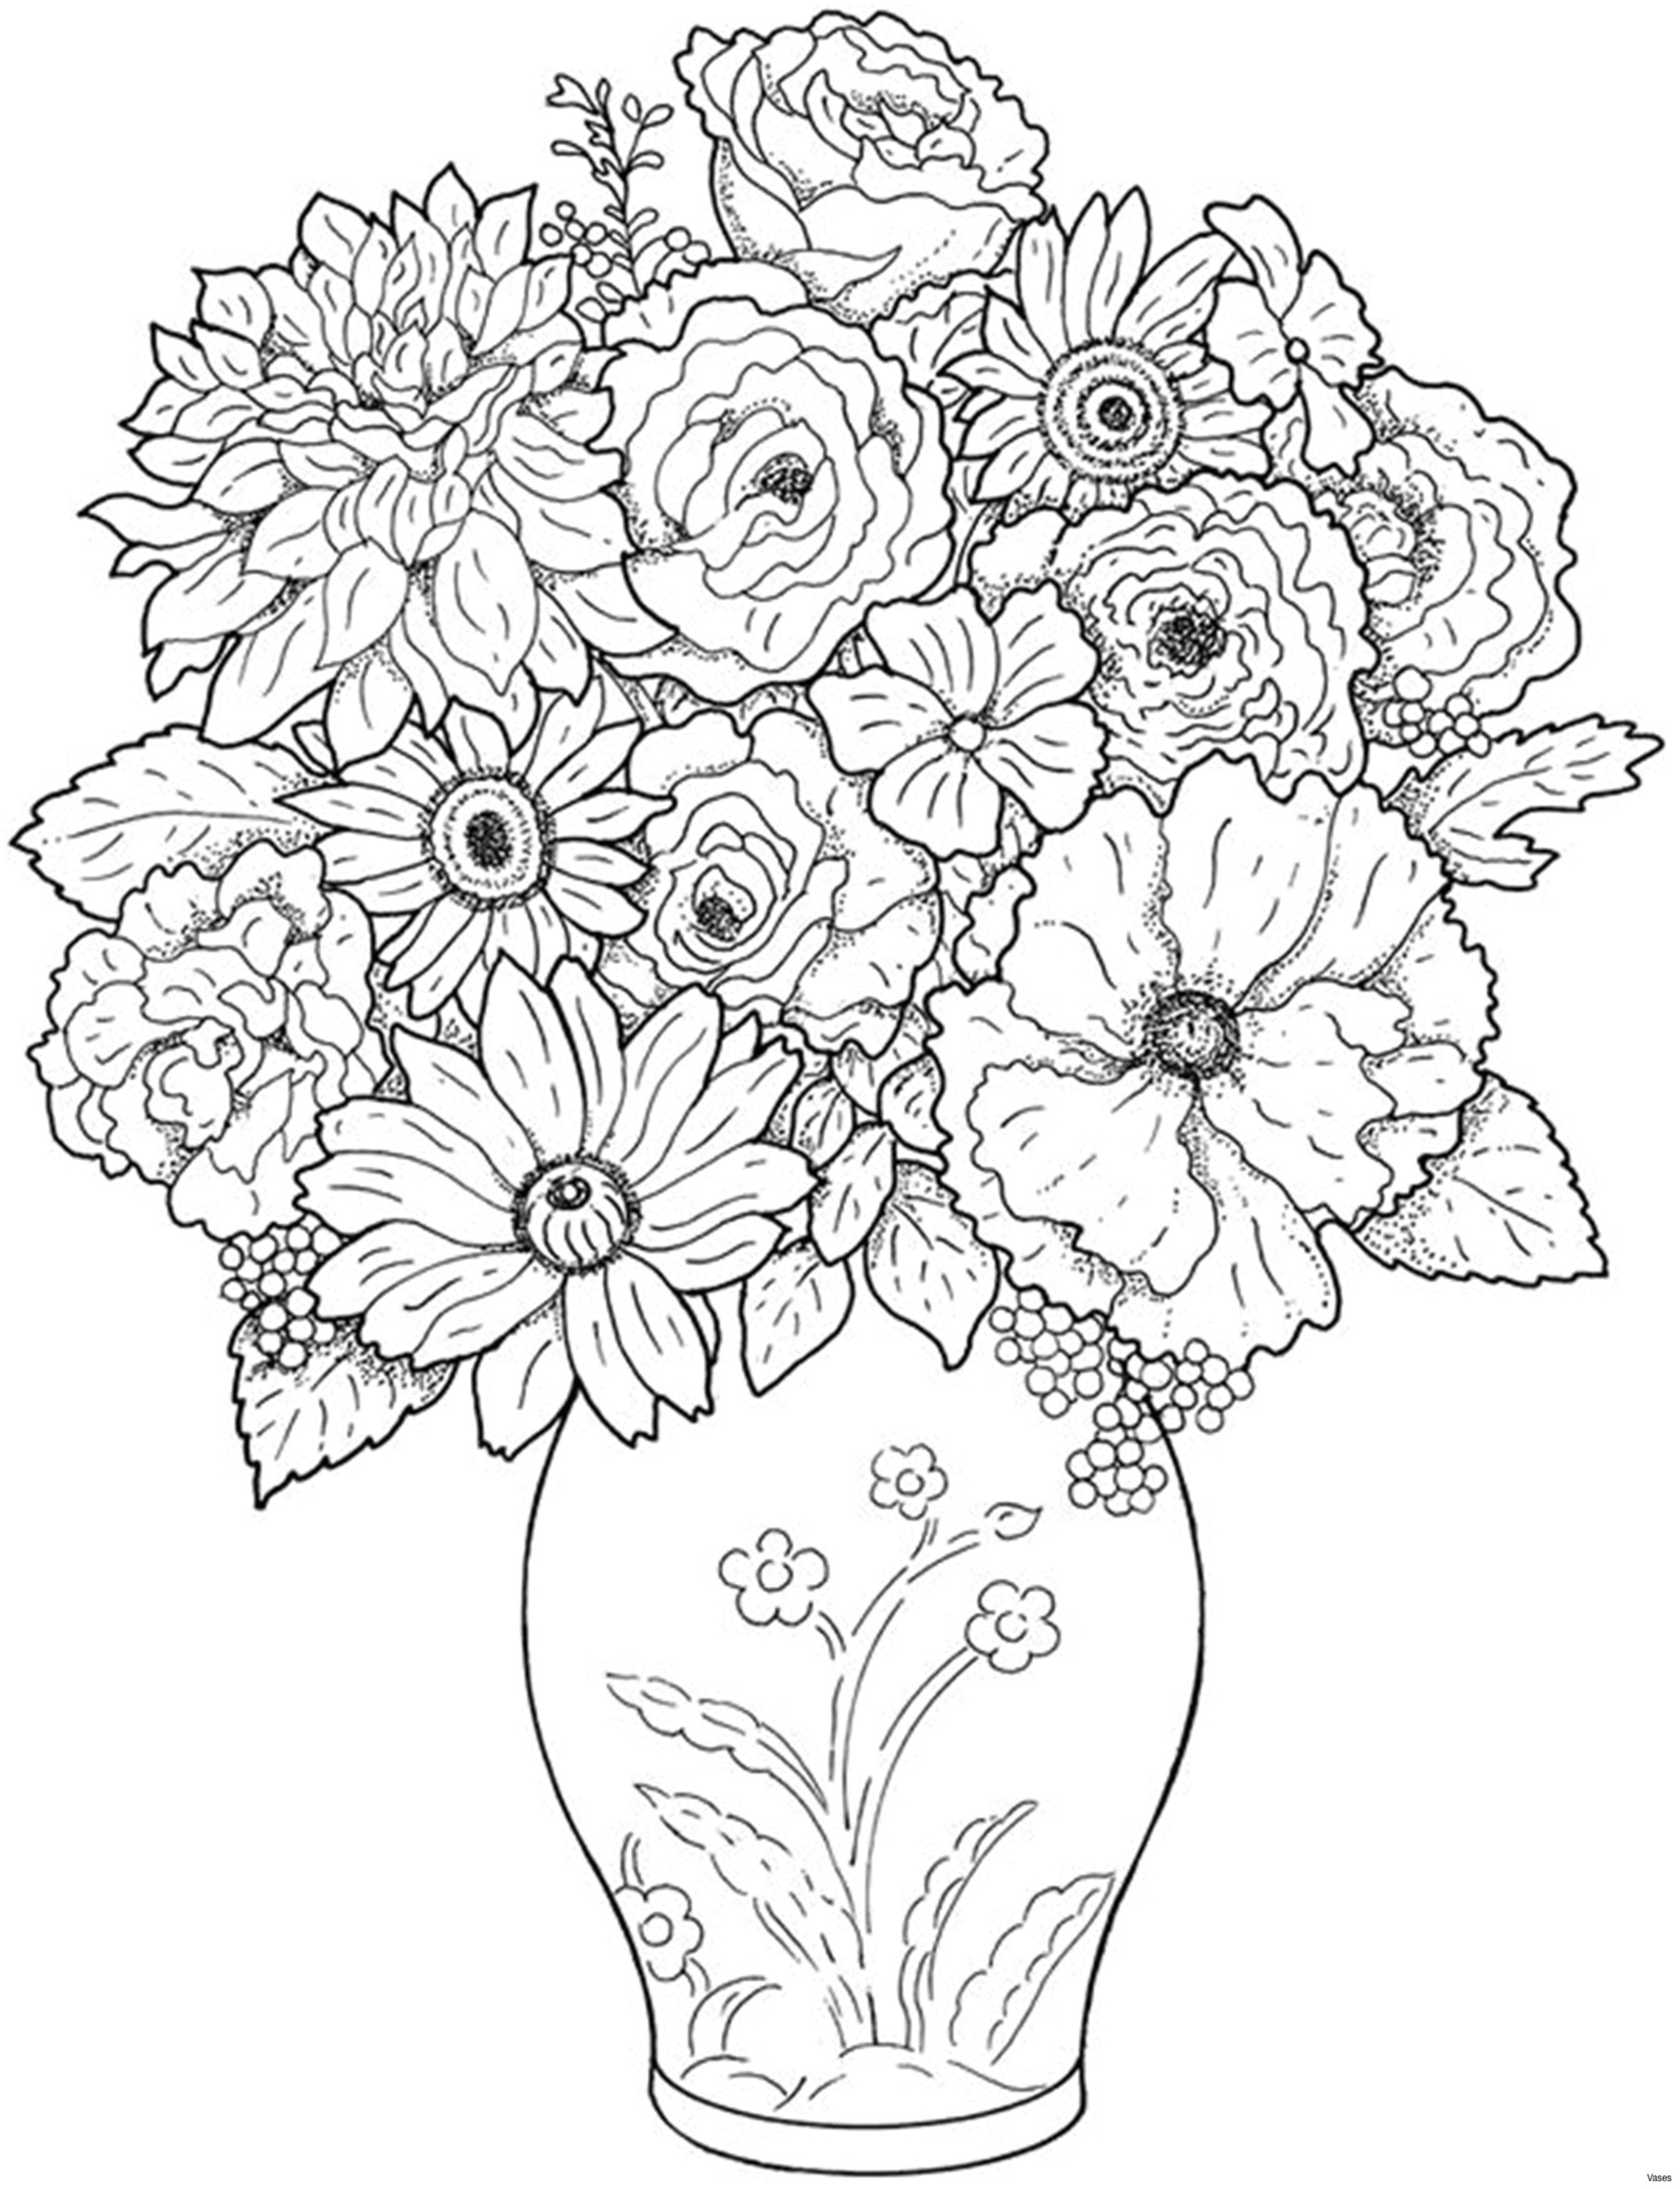 Drawings Of Flowers to Color Fresh Flowers to Color Creditoparataxi Com